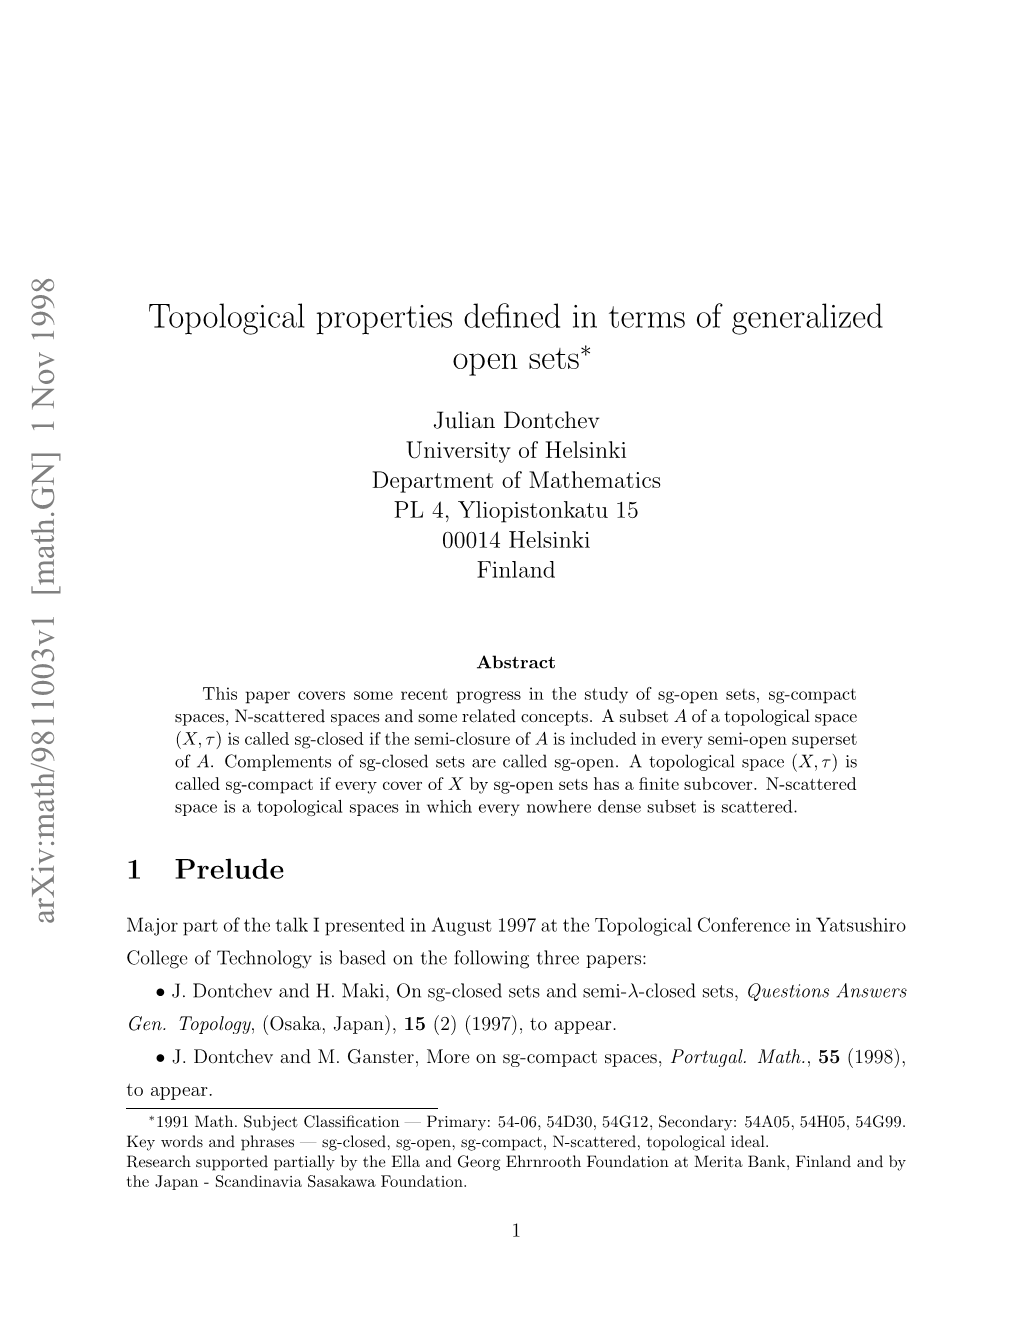 Topological Properties Defined in Terms of Generalized Open Sets